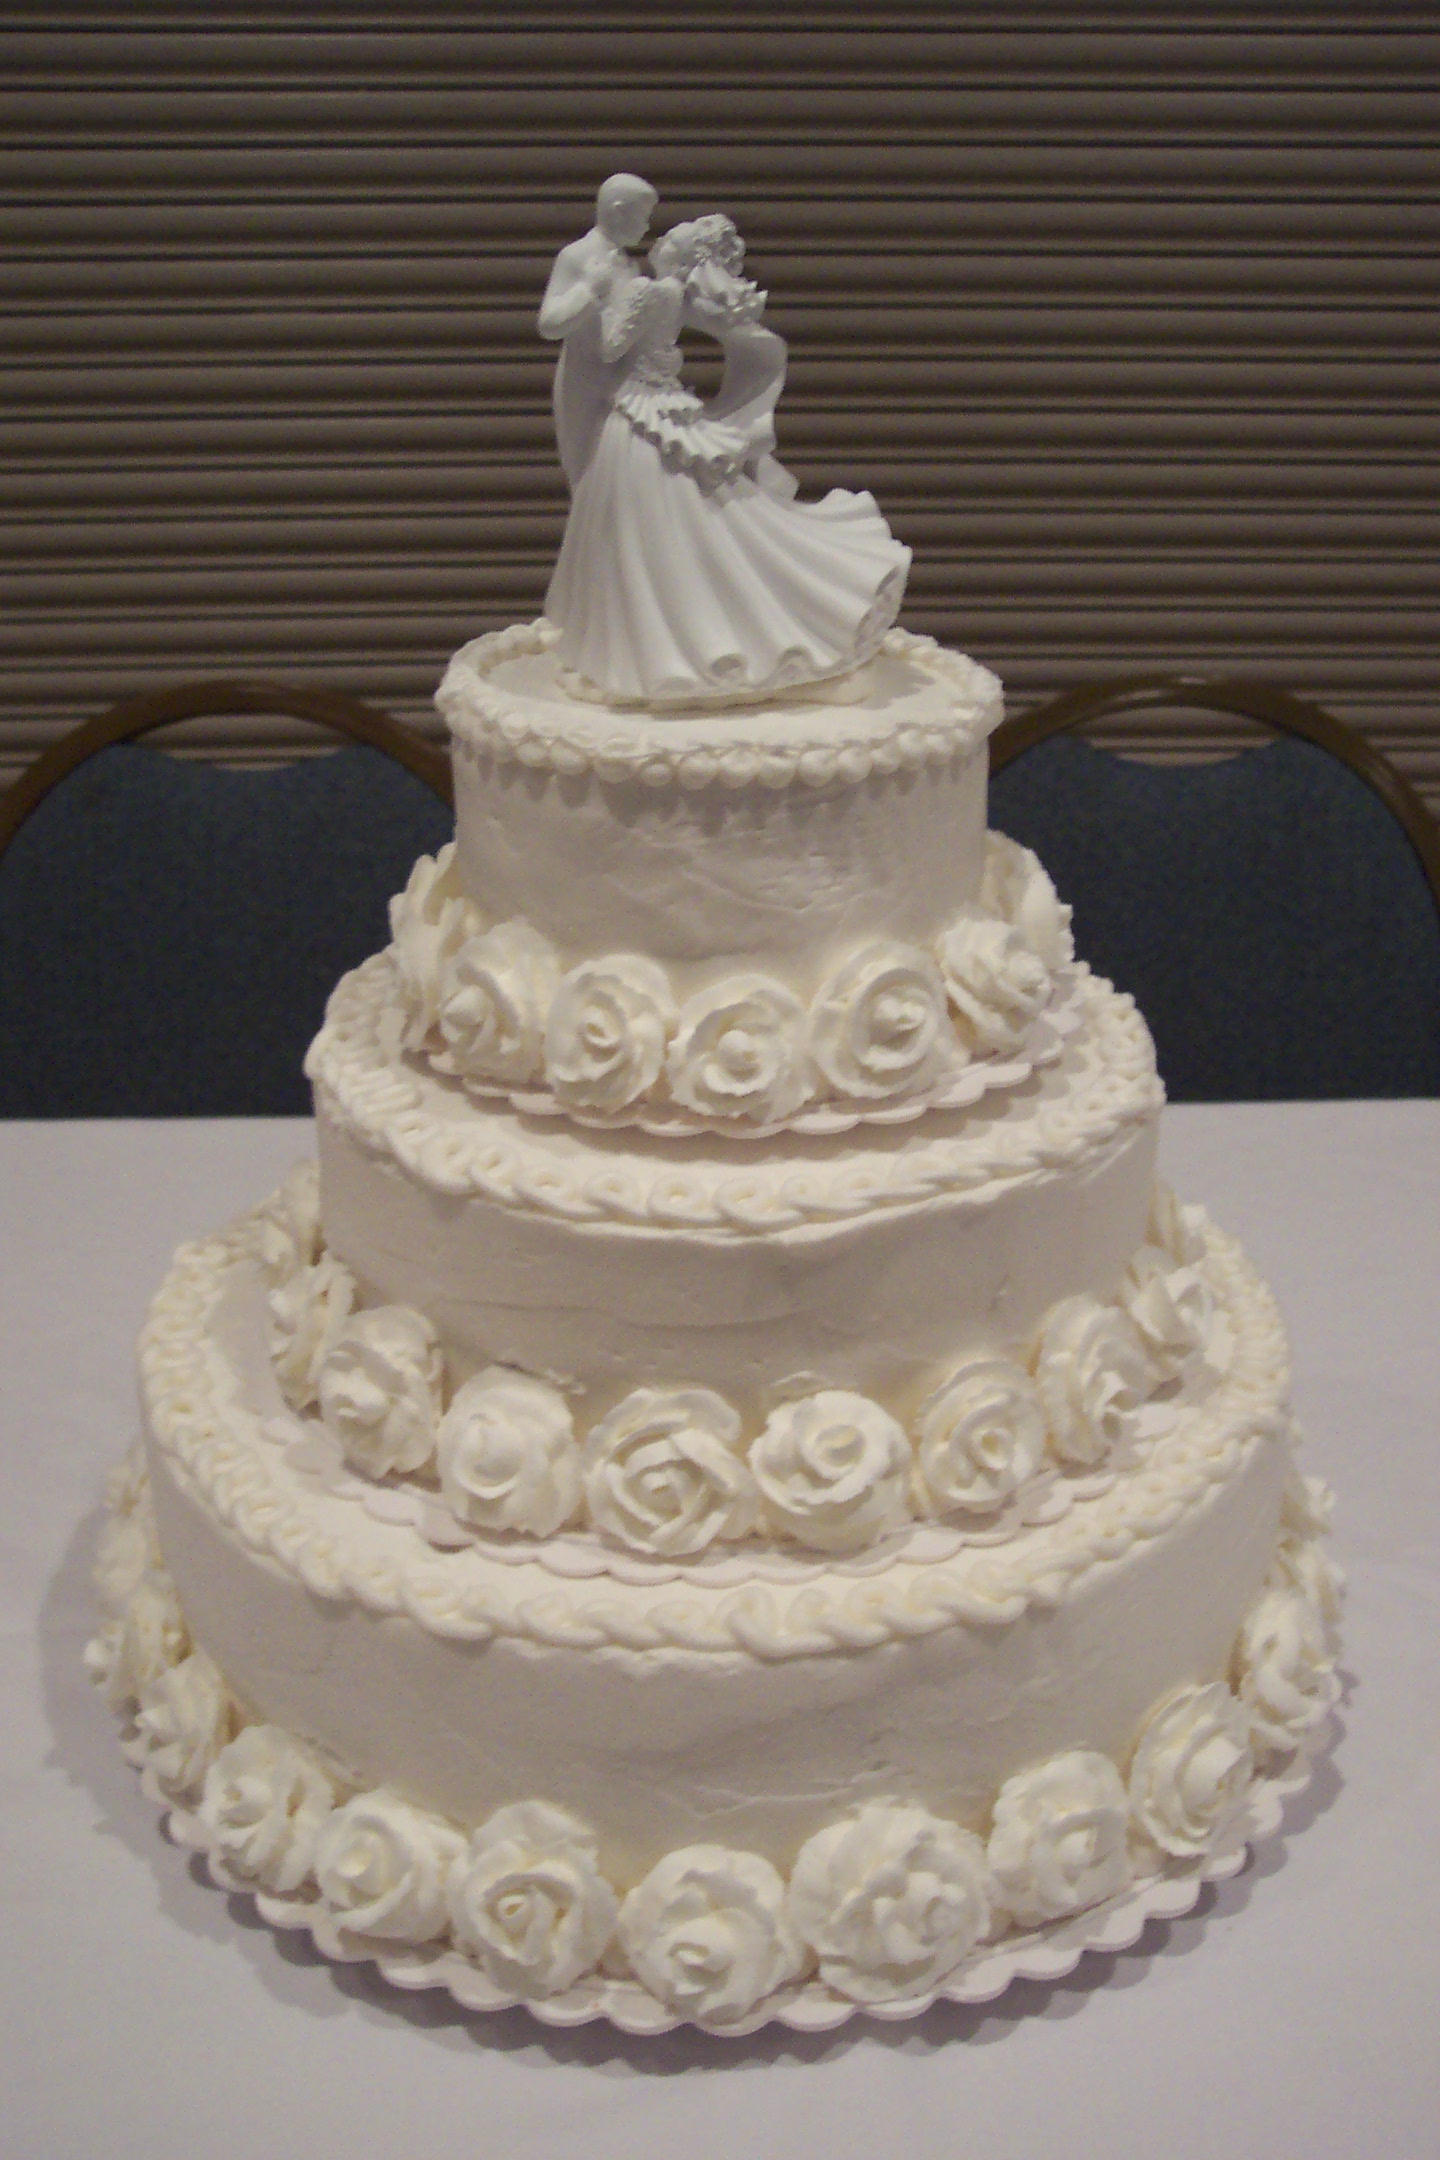 3-Tier Stacked Round Cake with Royal Icing Roses